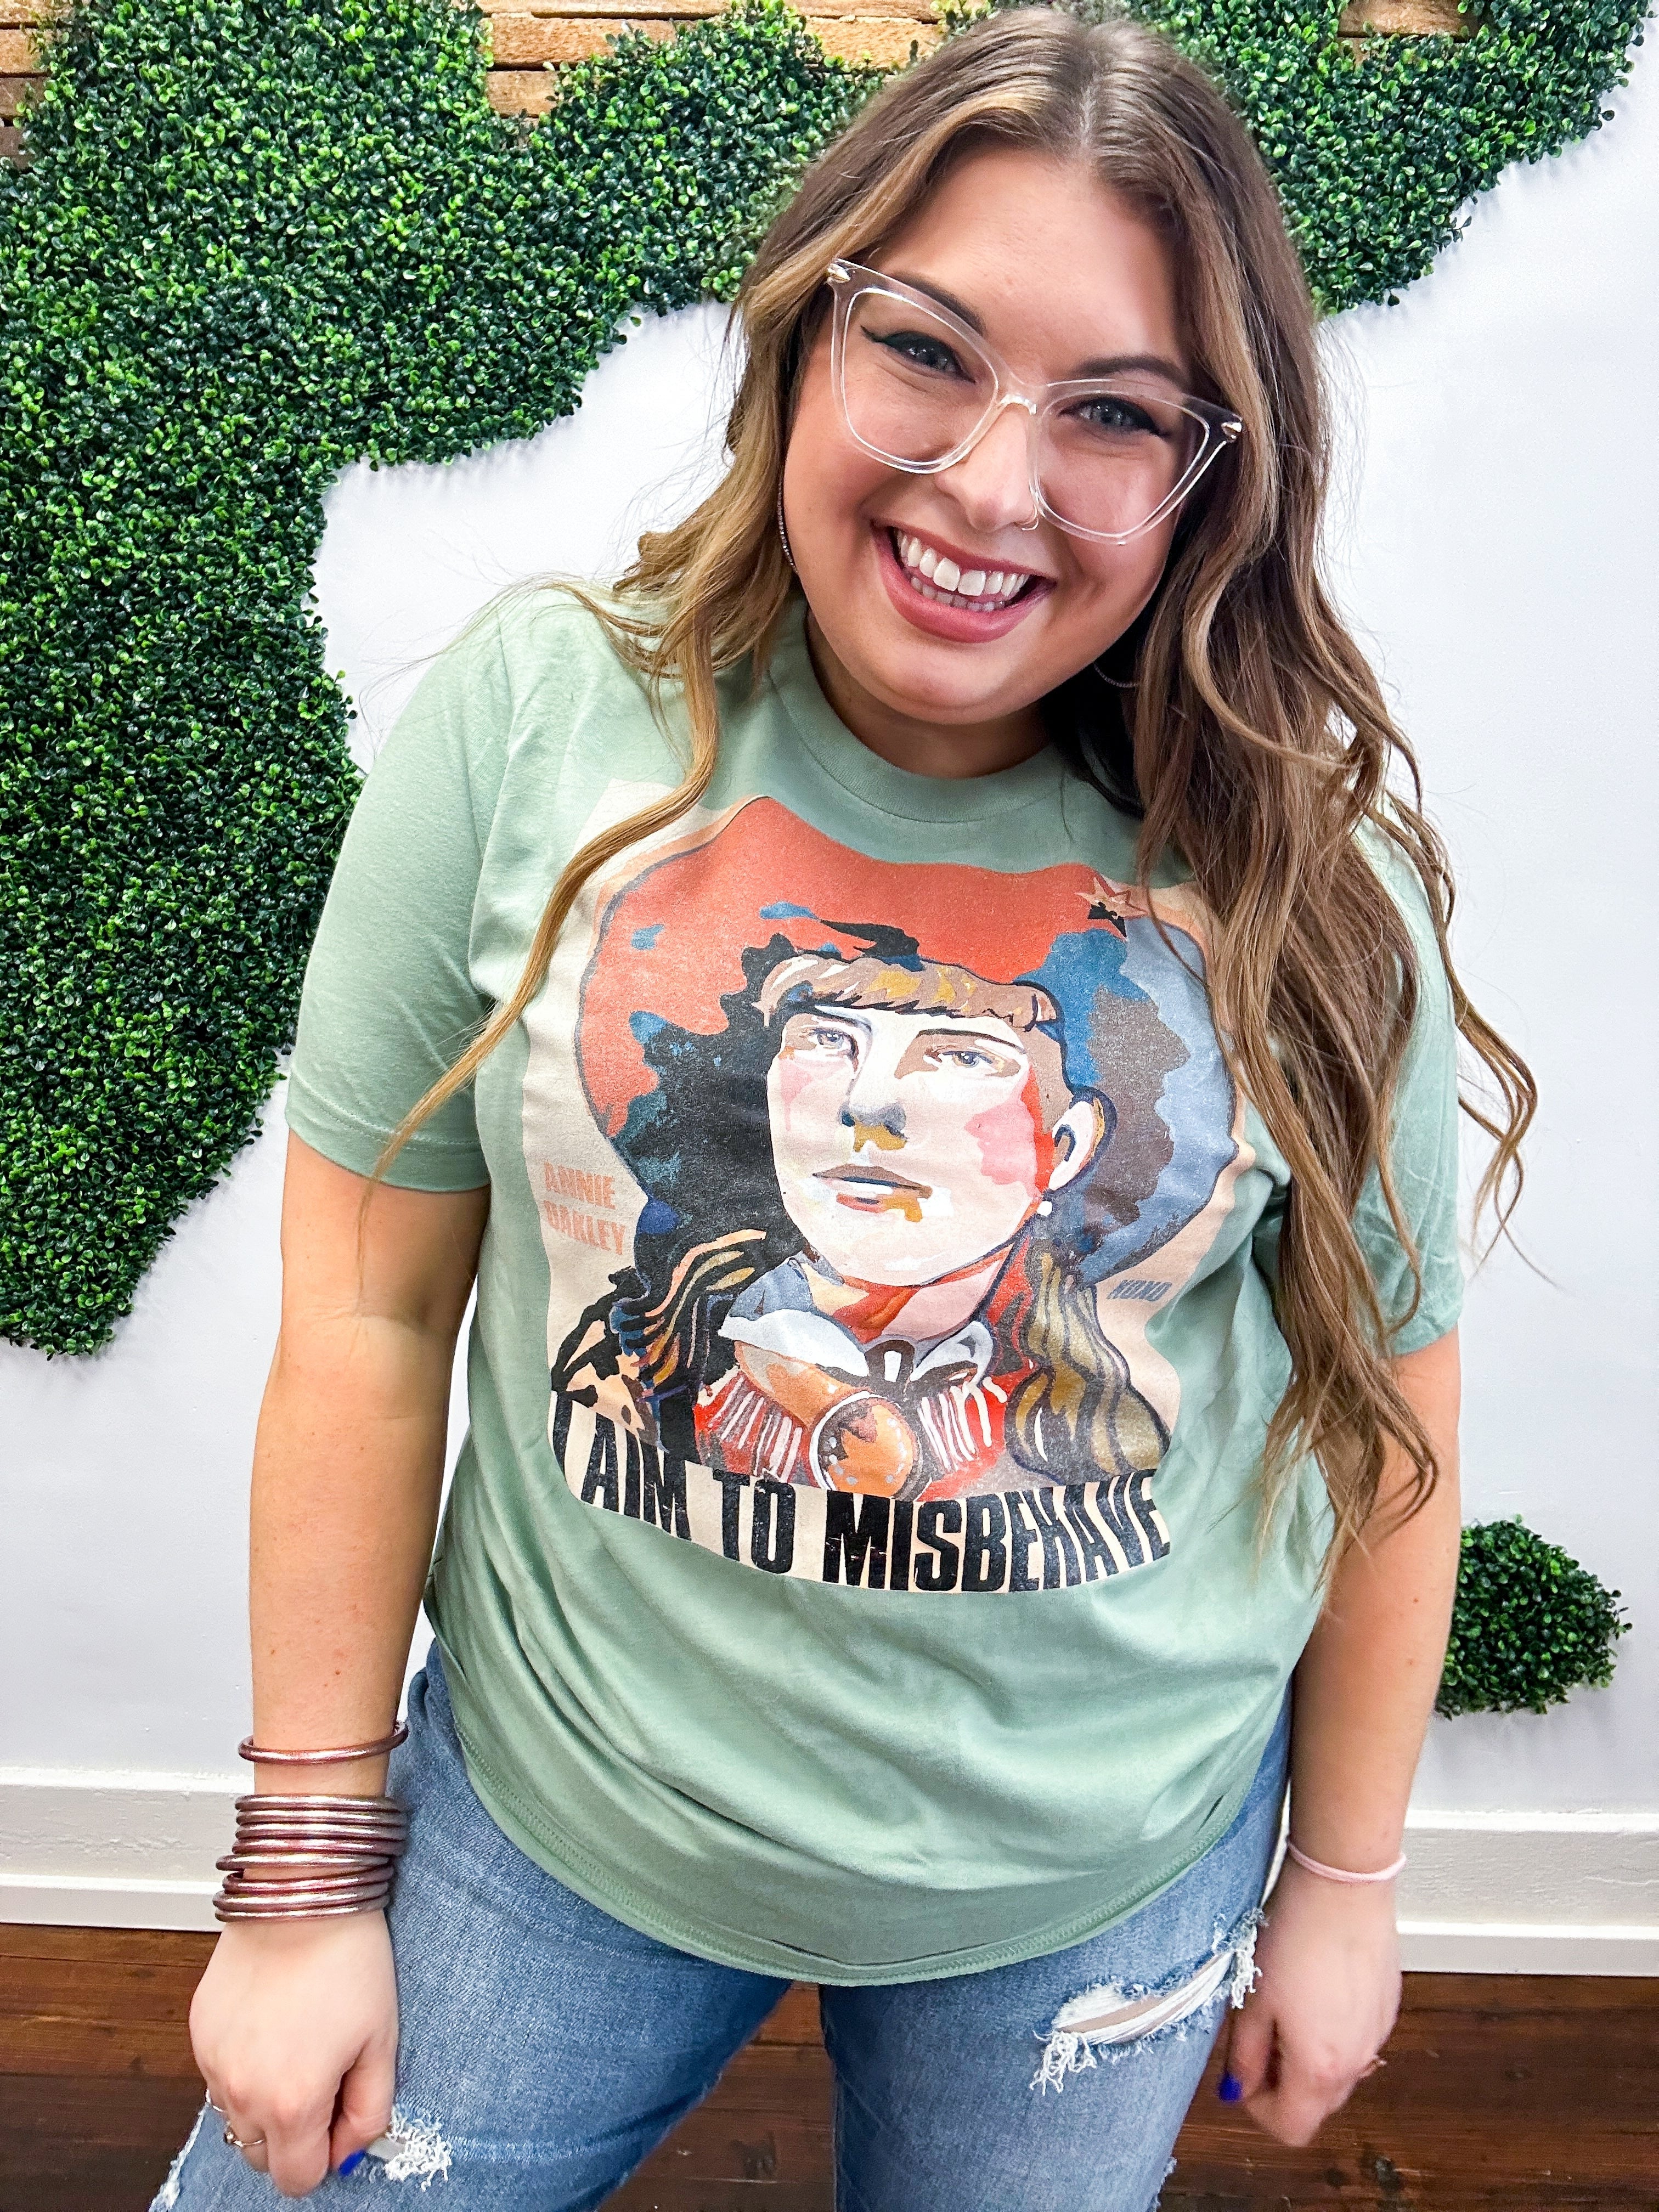 I Aim To Misbehave Annie Oakley Tee